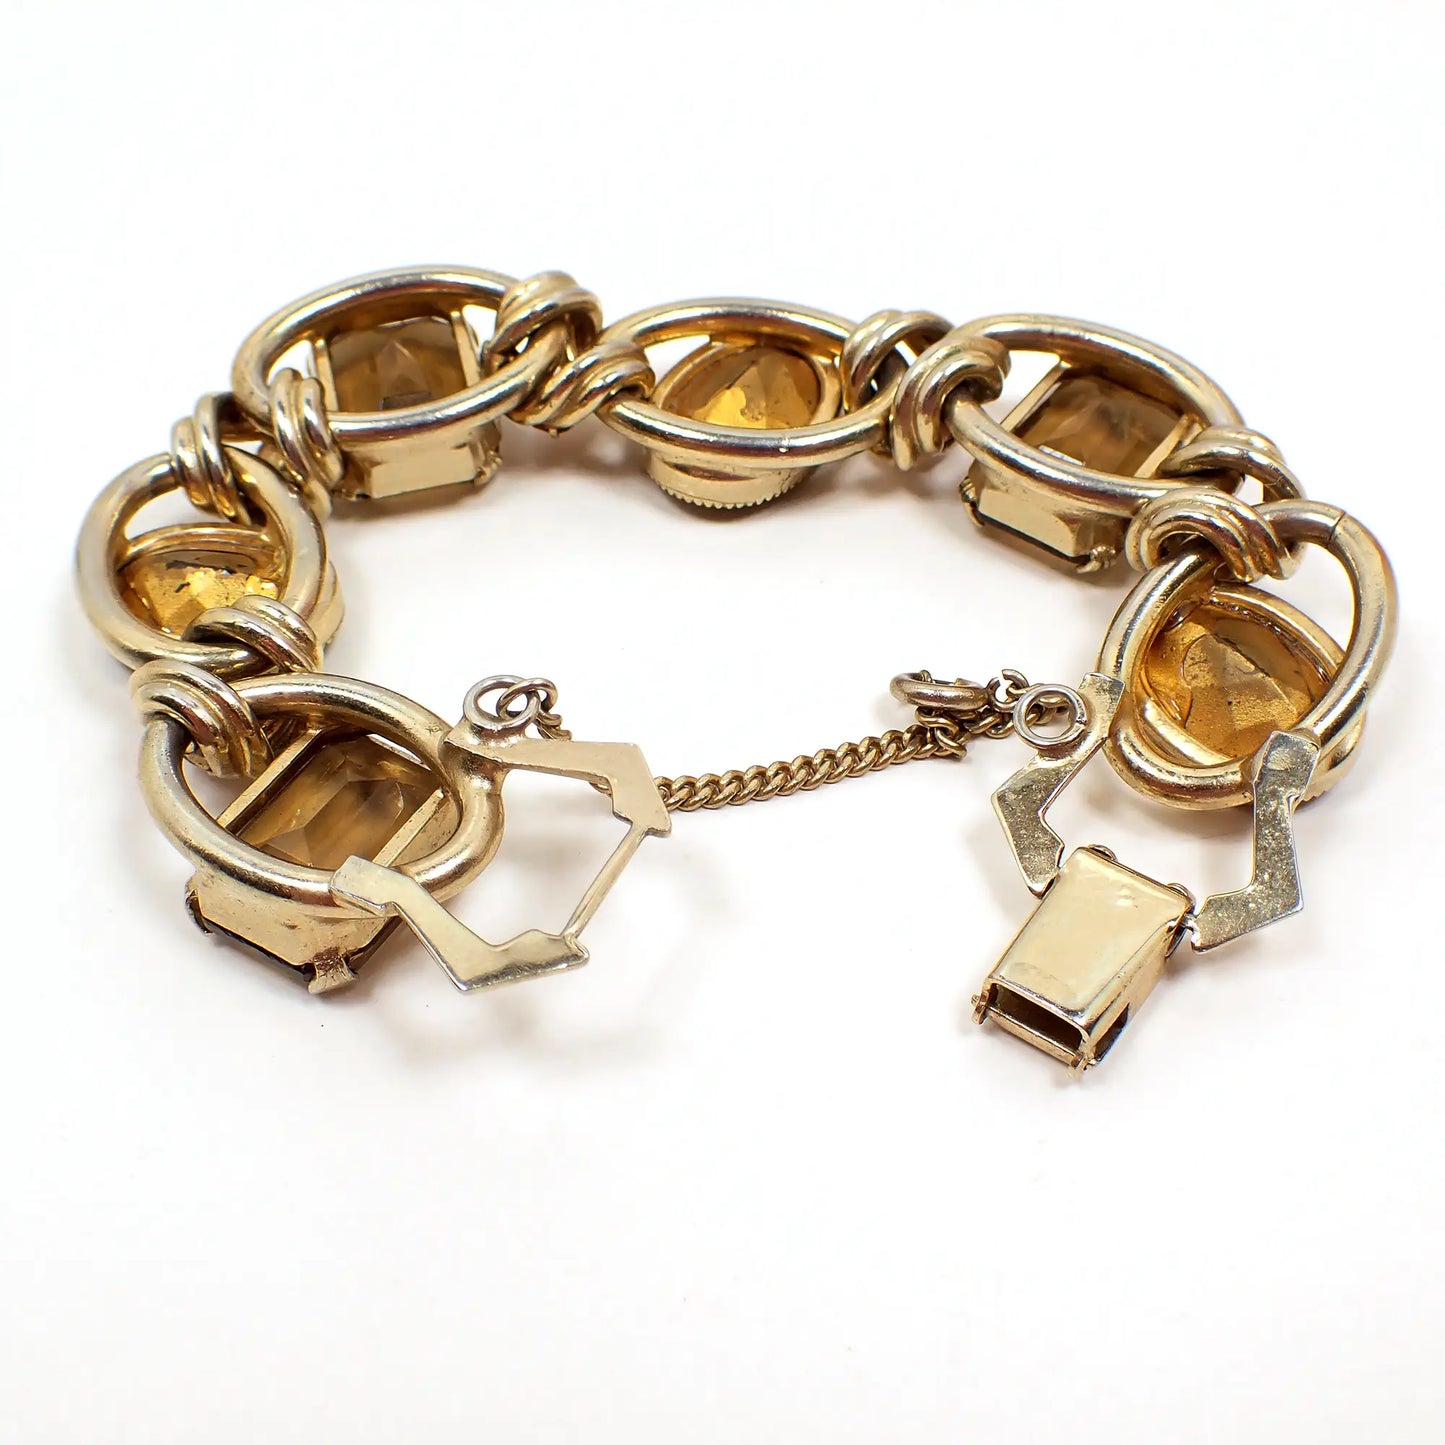 1960's Chunky Topaz and Citrine Color Vintage Rhinestone Bracelet with Safety Chain